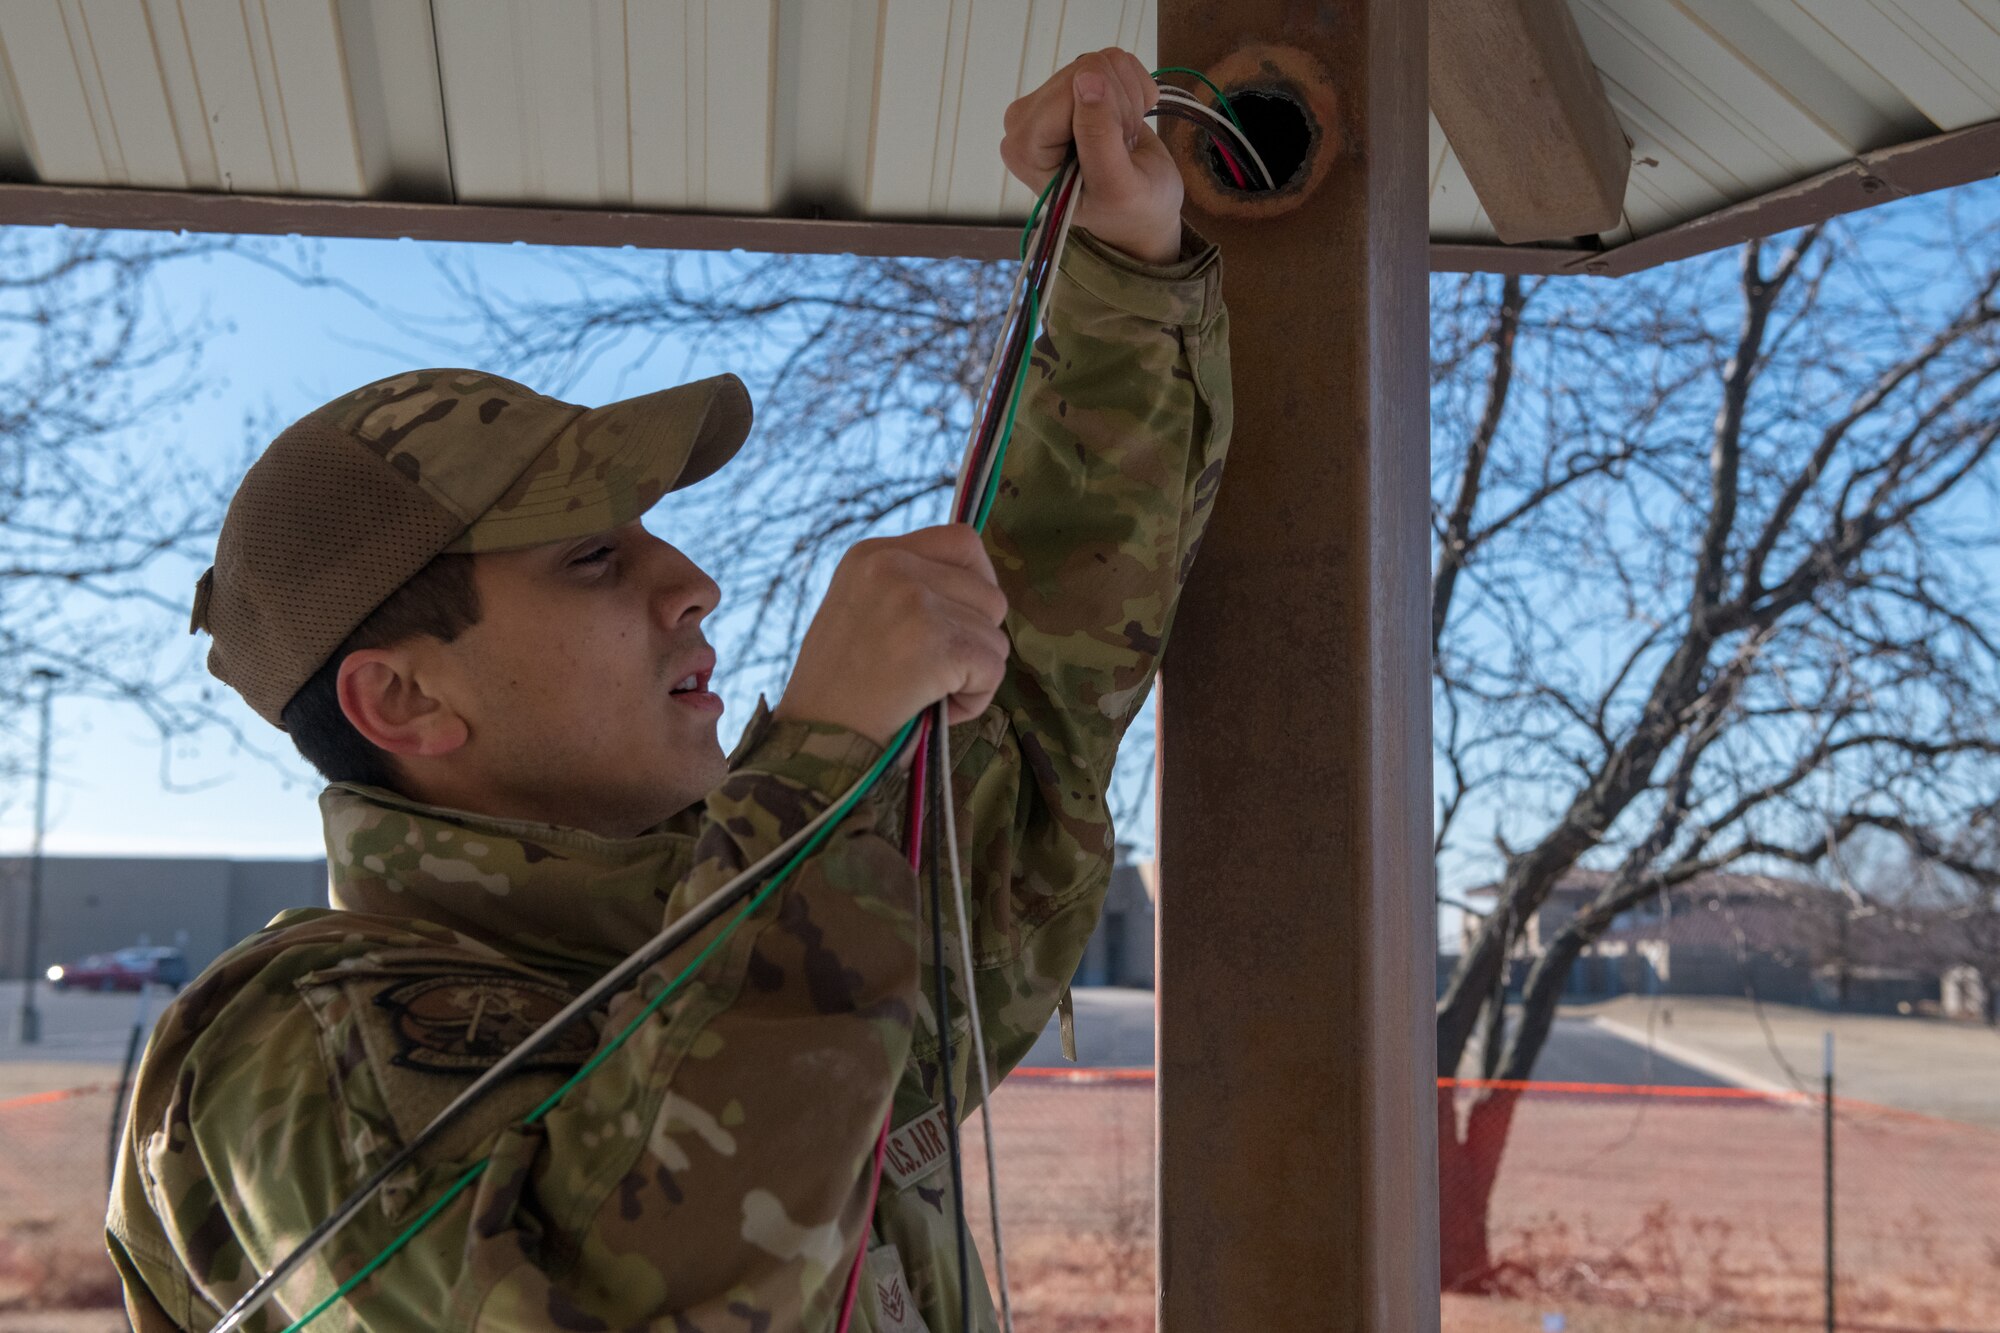 Staff Sgt. Daniel Doane, 22nd Civil Engineer Squadron power production craftsman, feeds wires into the gazebo in preparation for installing solar panels in the new Food Truck Park Feb. 2, 2023, at McConnell Air Force Base, Kansas. The 22nd CES has been working on a new Food Truck Park with plans to officially open in April. (U.S. Air Force photo by Airman 1st Class Felicia Przydzial)